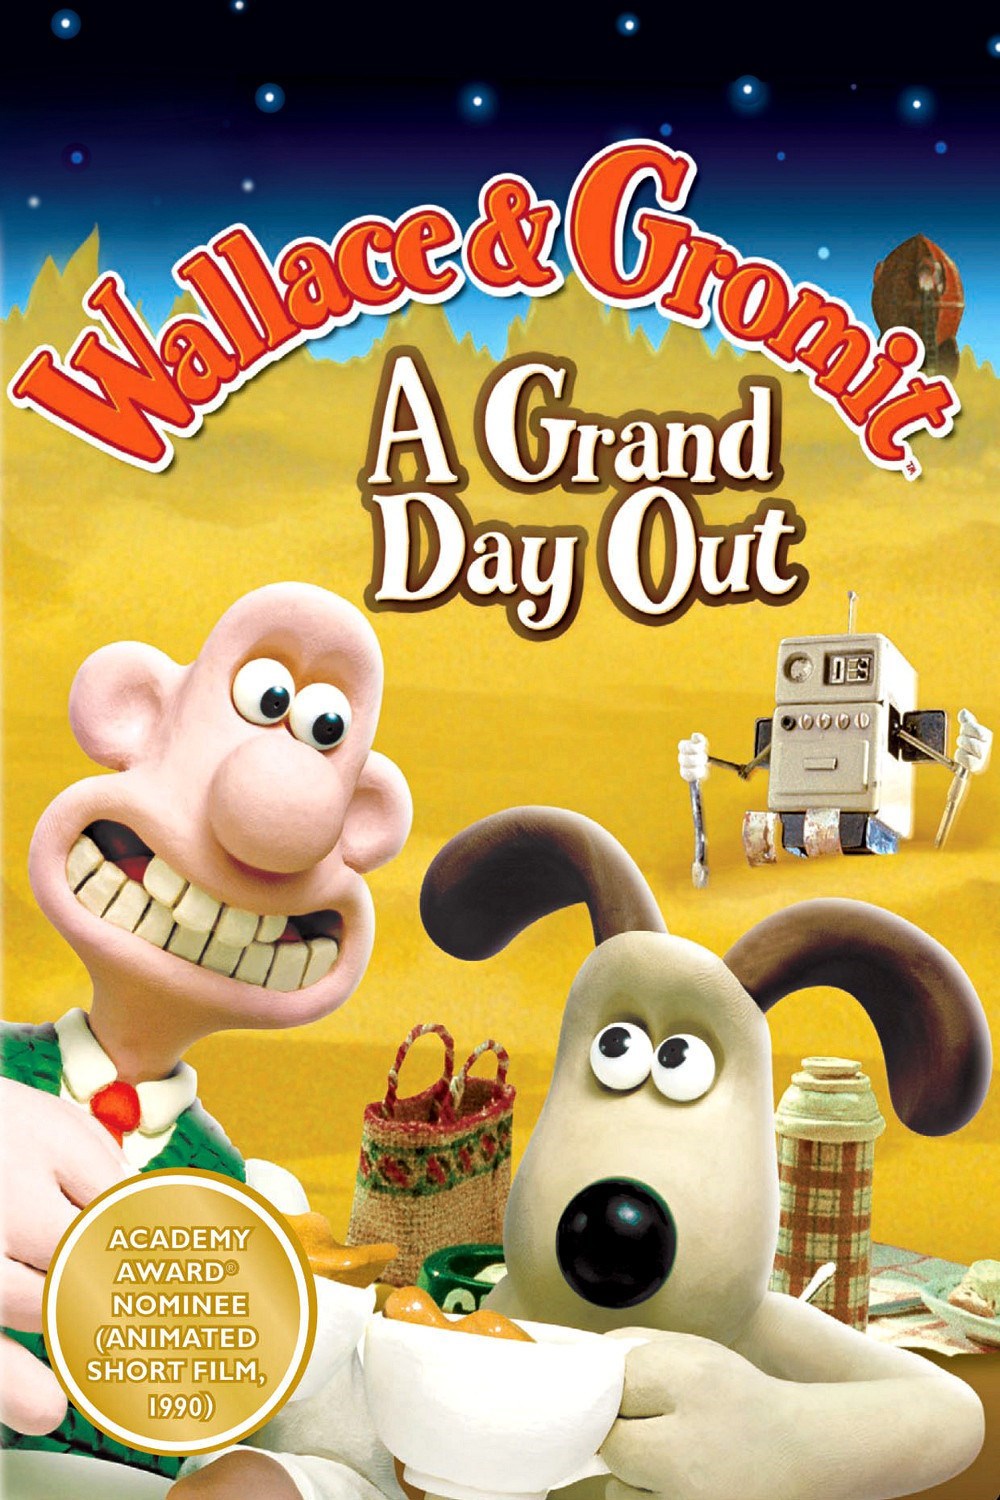 A Grand Day Out - Wikipedia